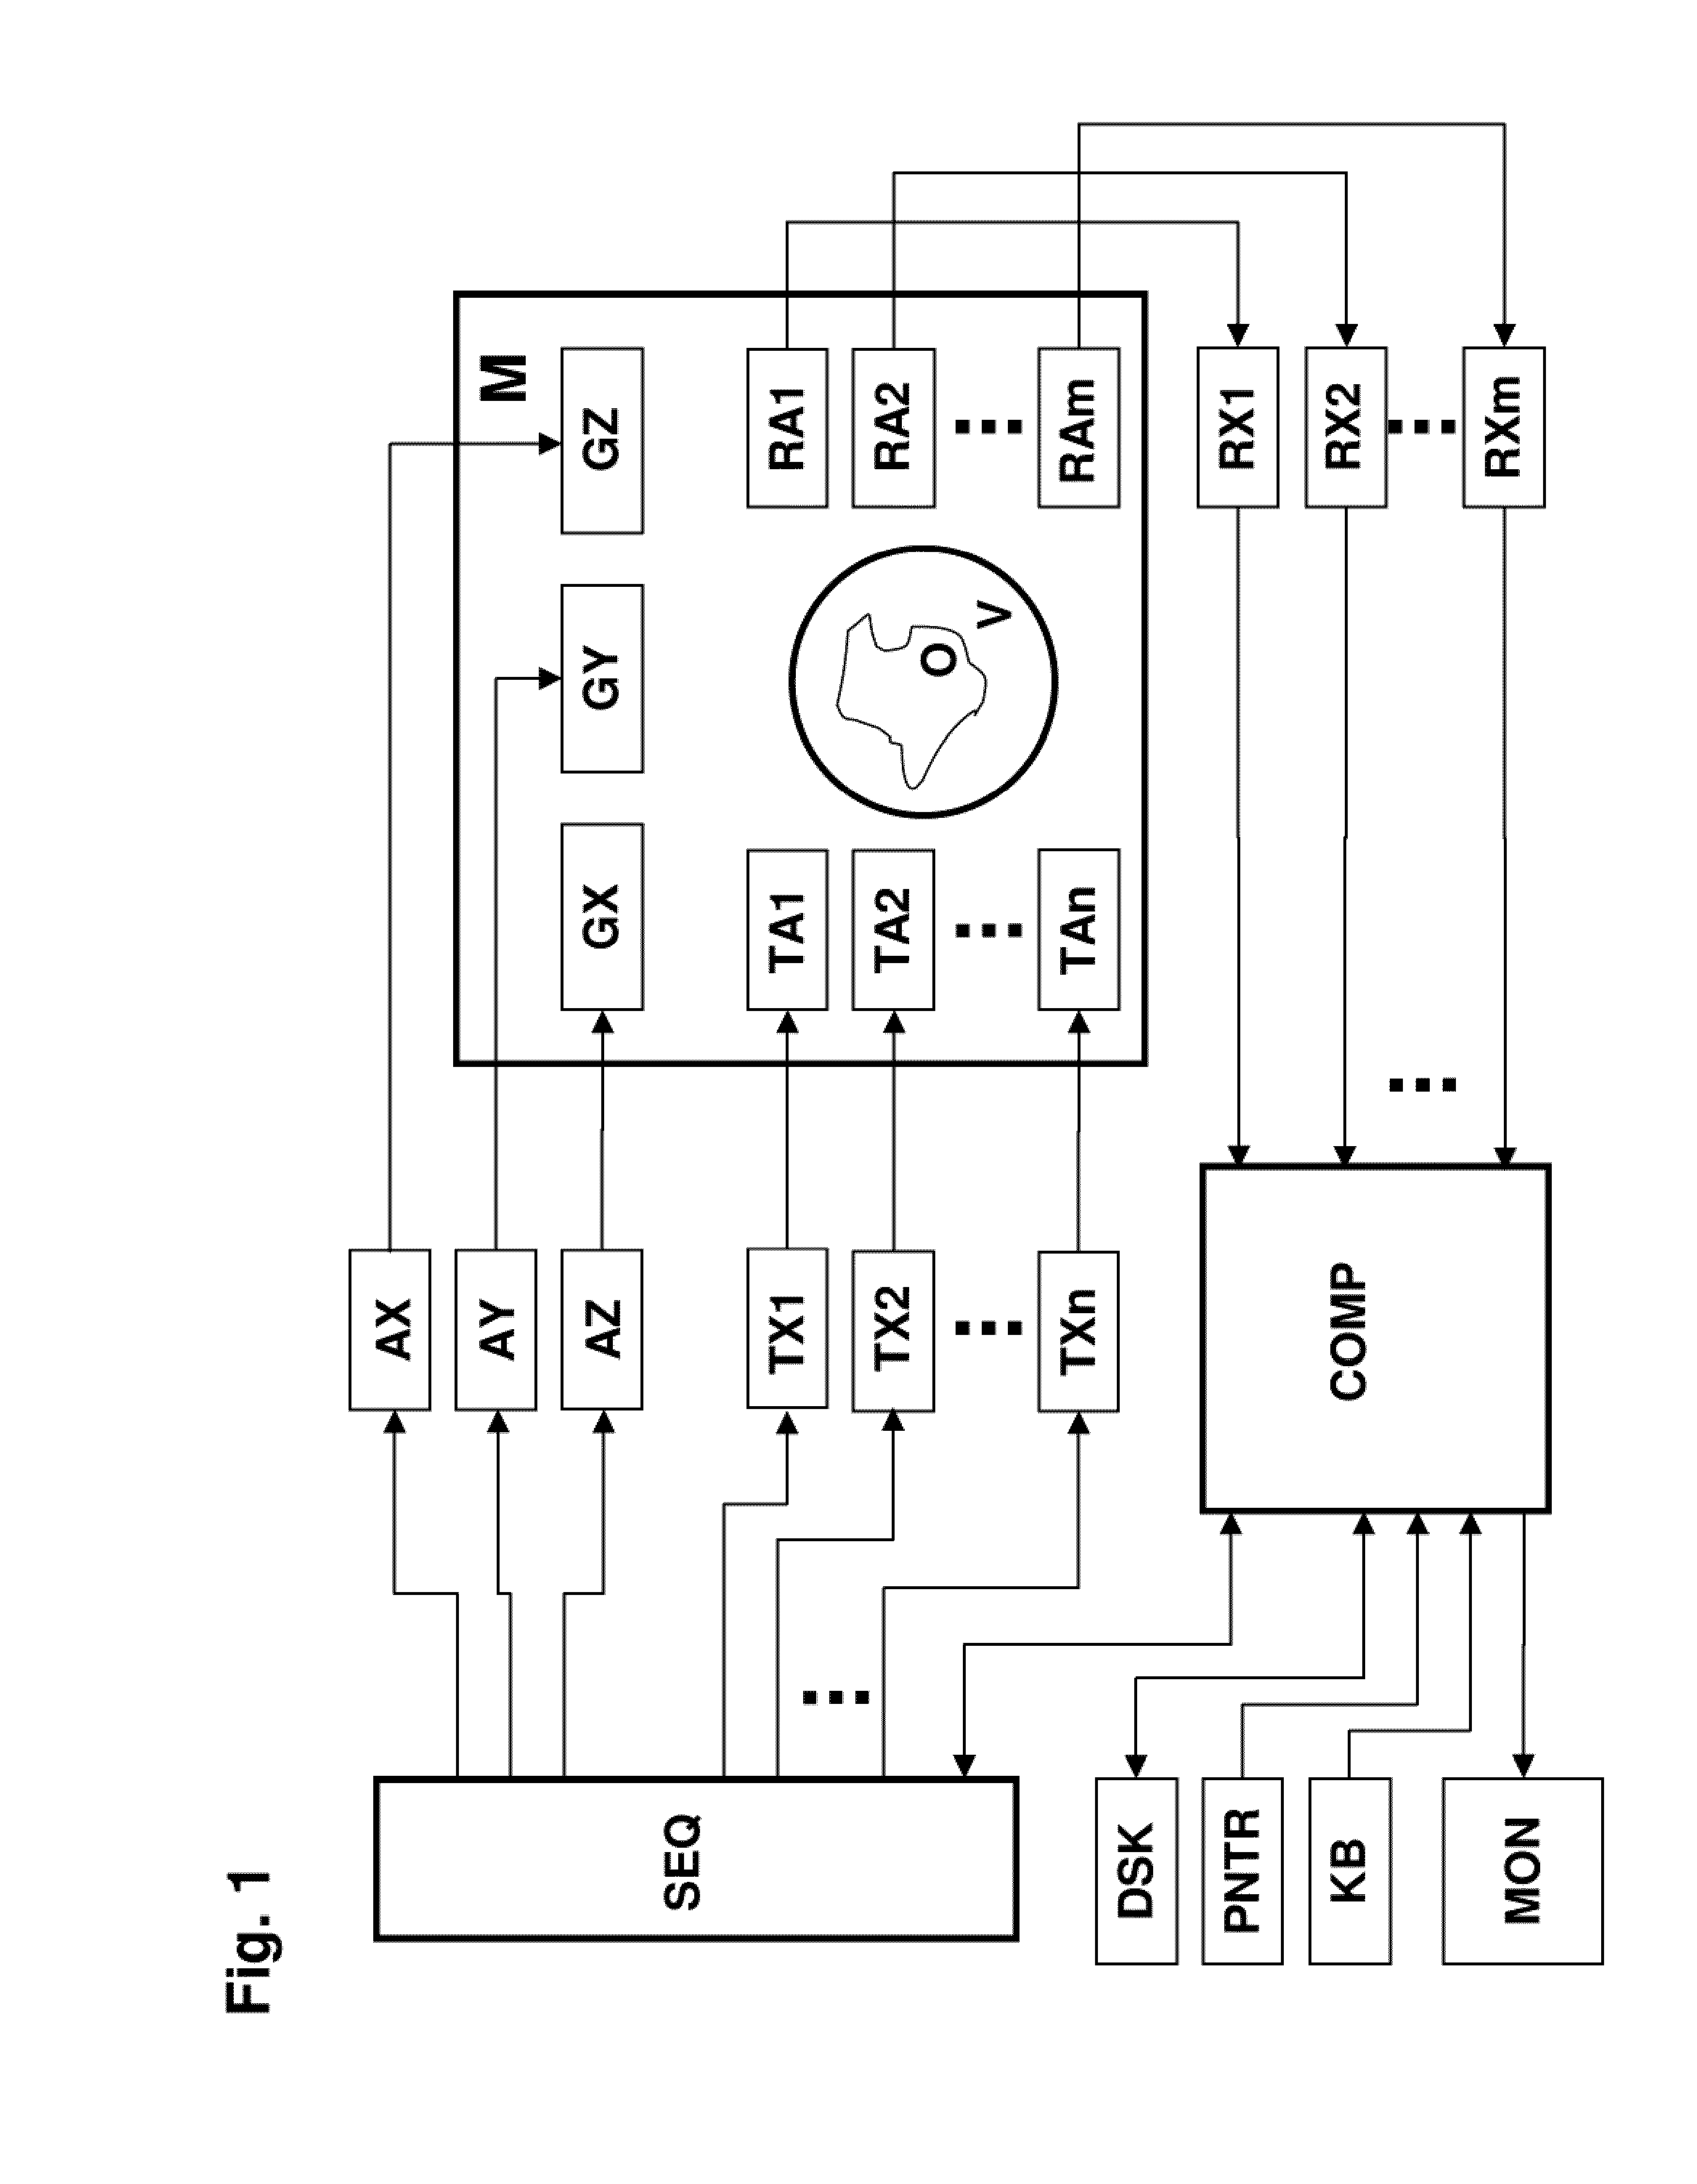 Method for determining the spatial distribution of magnetic resonance signals through multi-dimensional RF excitation pulses